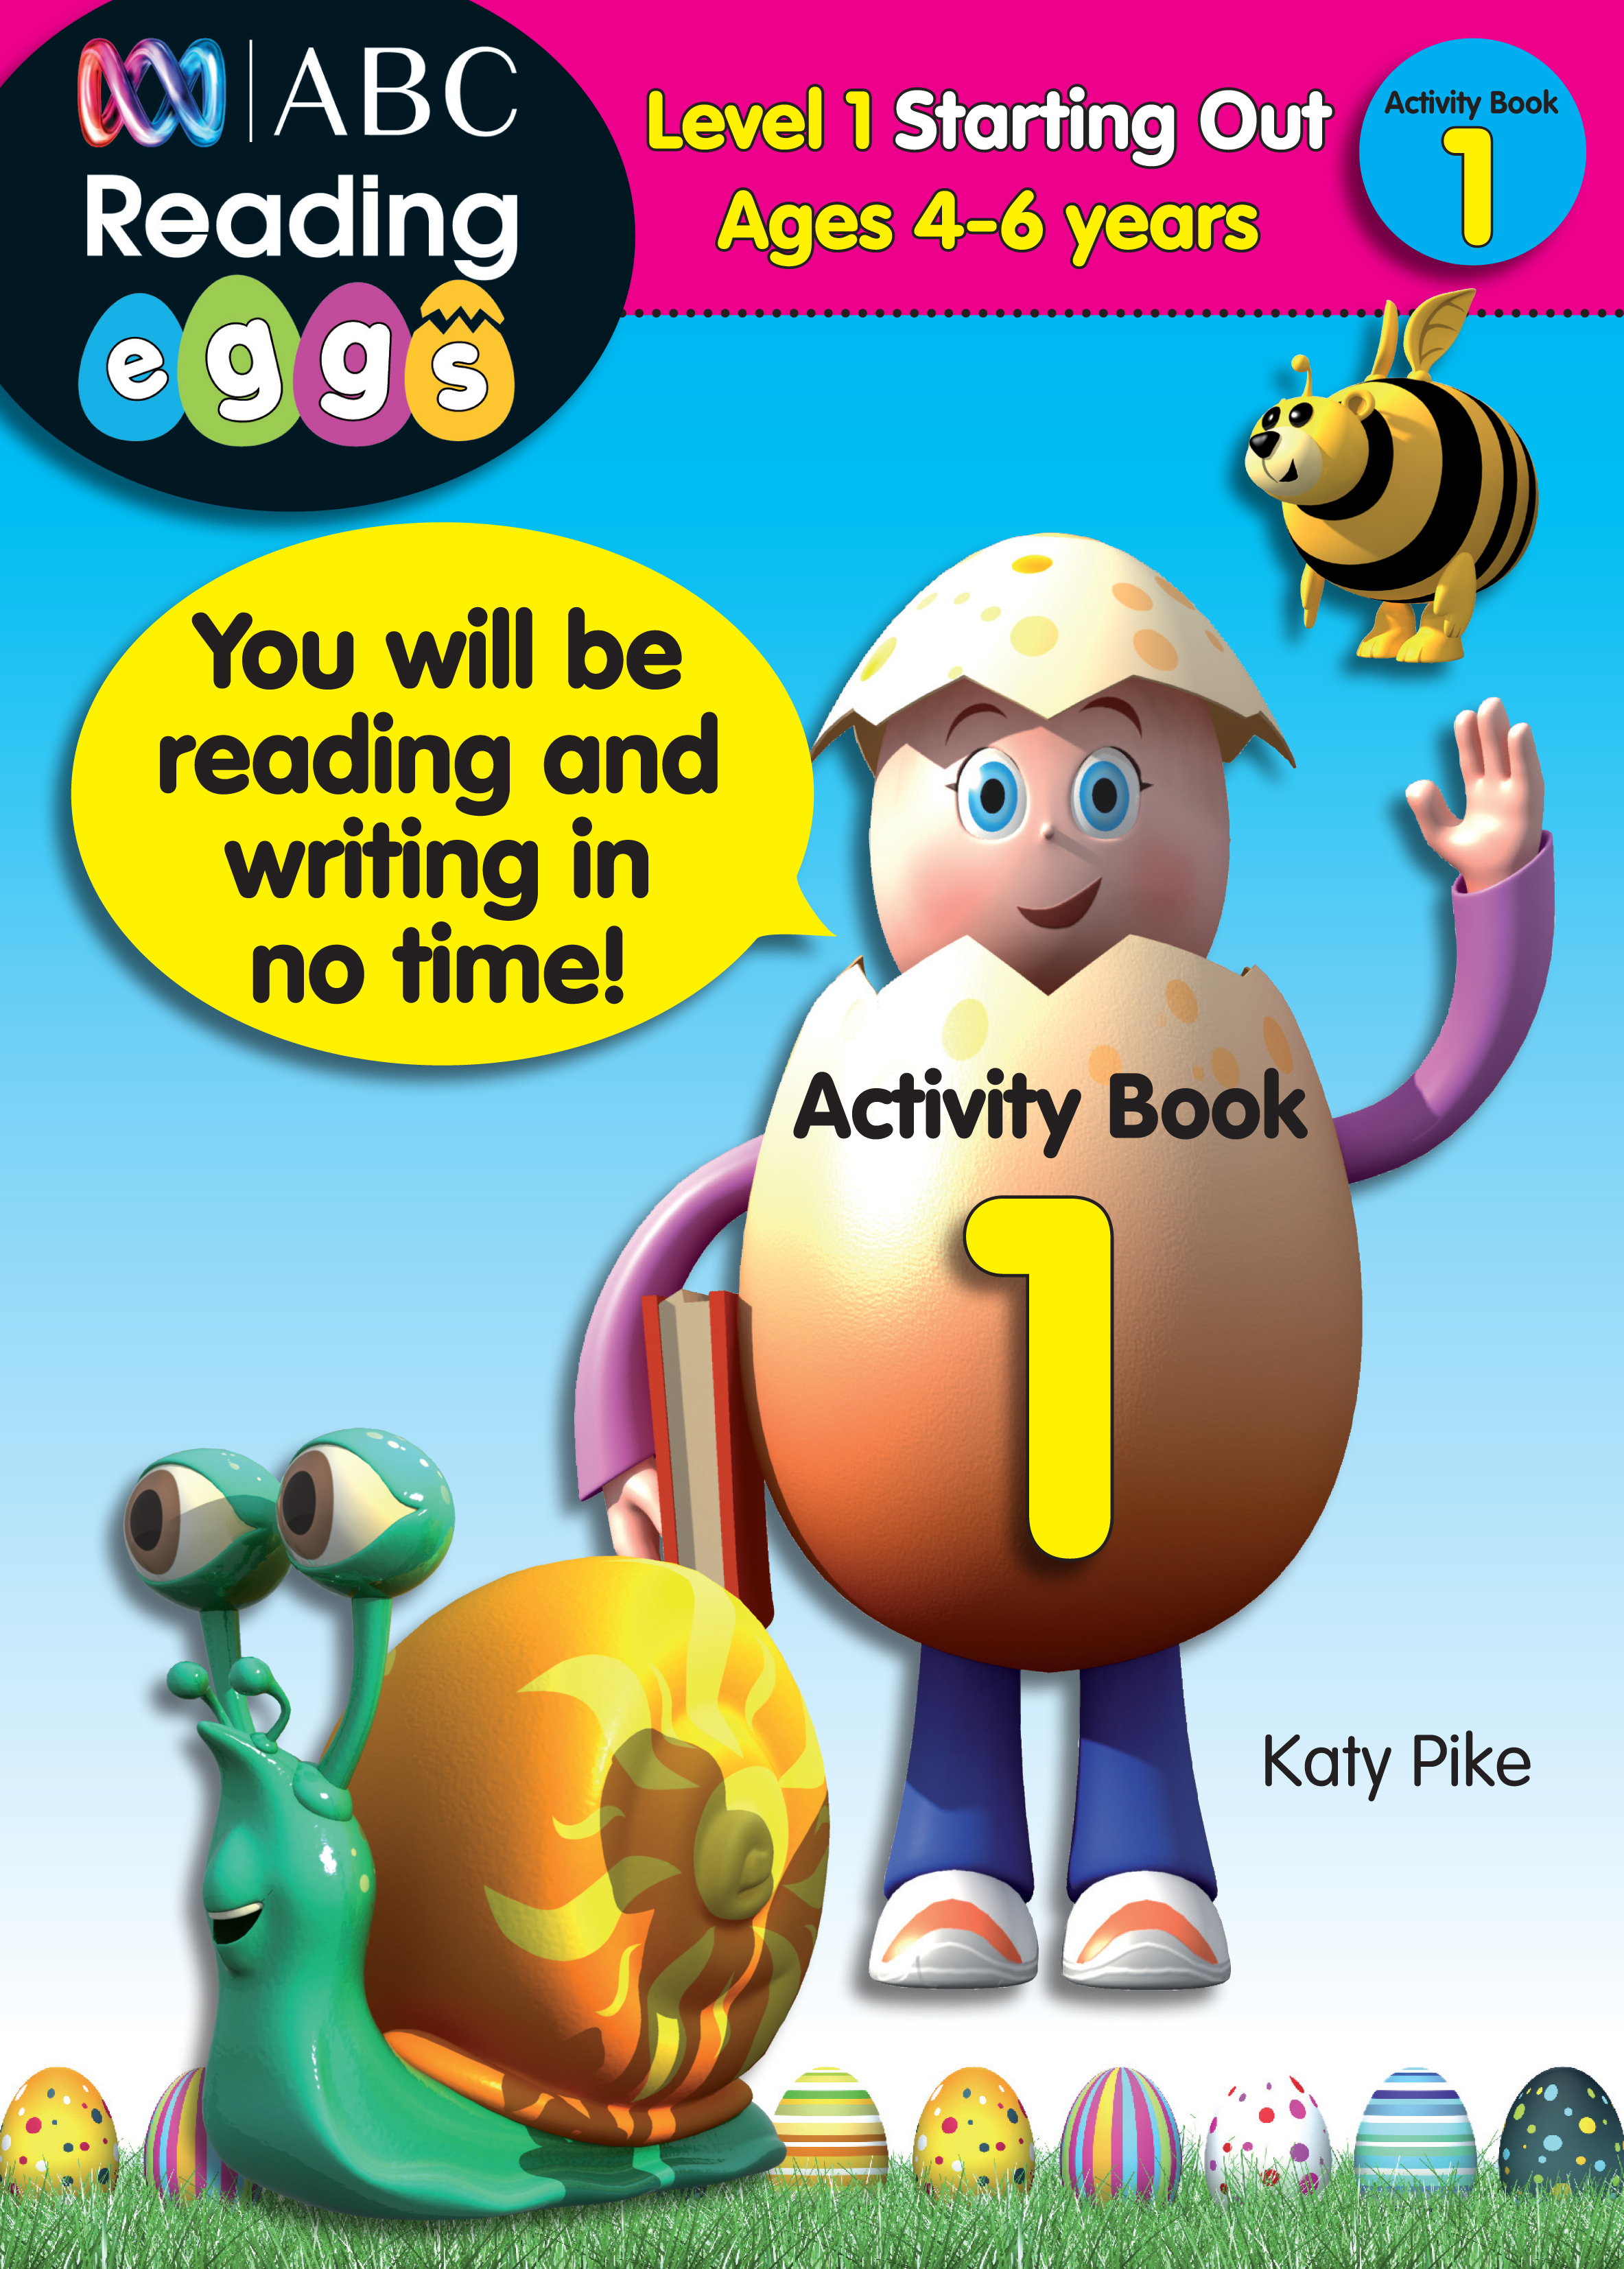 Picture of ABC Reading Eggs Level 1 Starting Out Activity Book 1 Ages 4-6